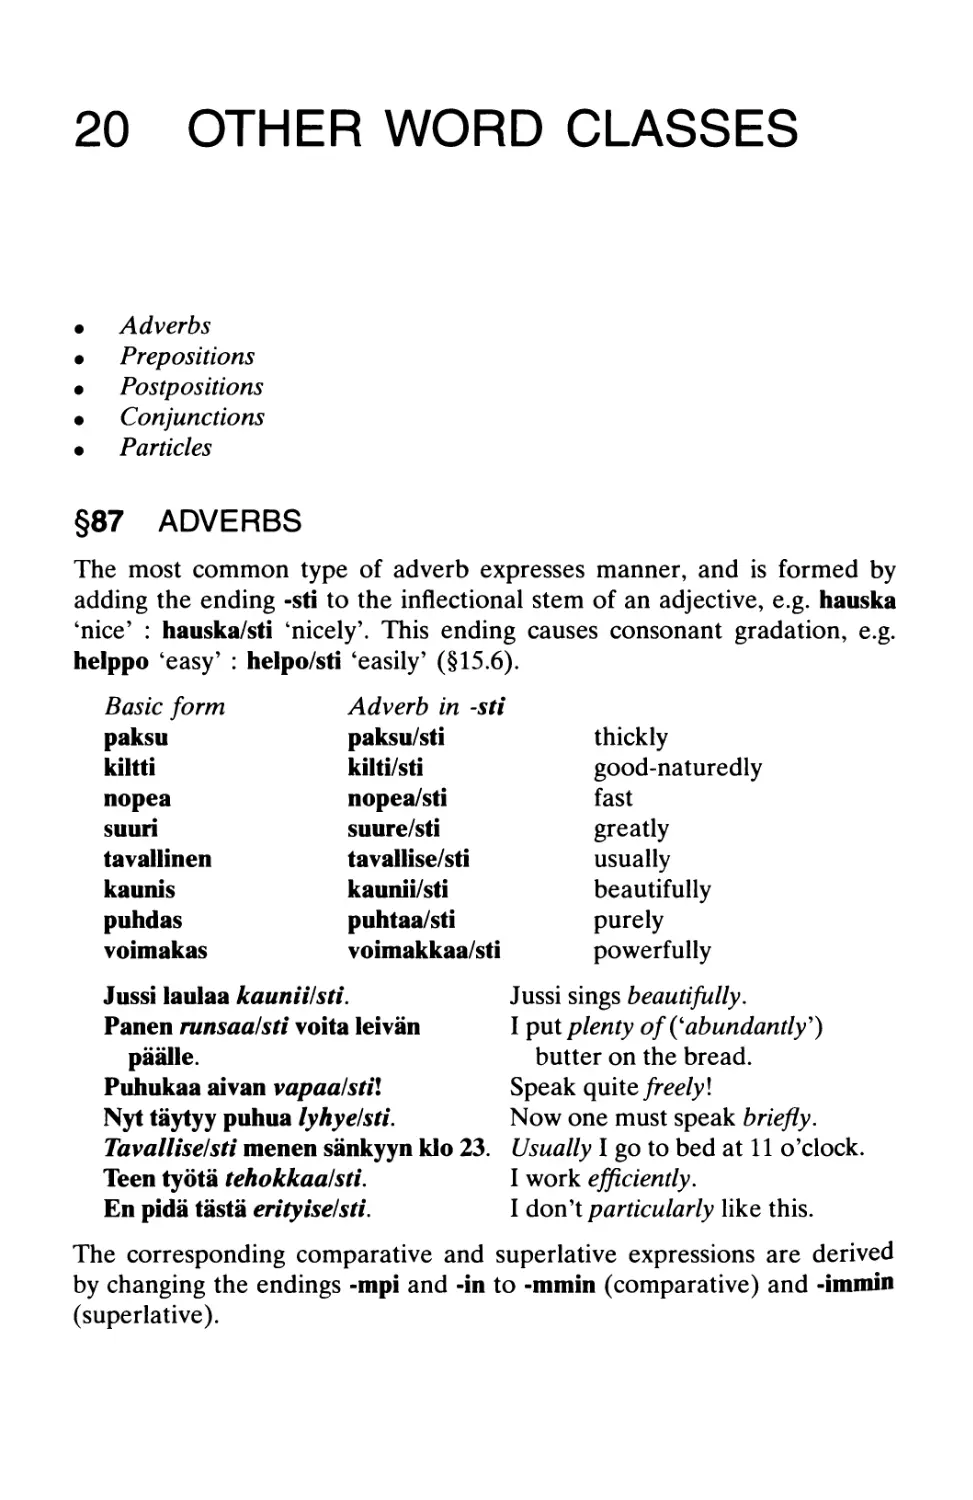 20 Other word classes
§87 Adverbs